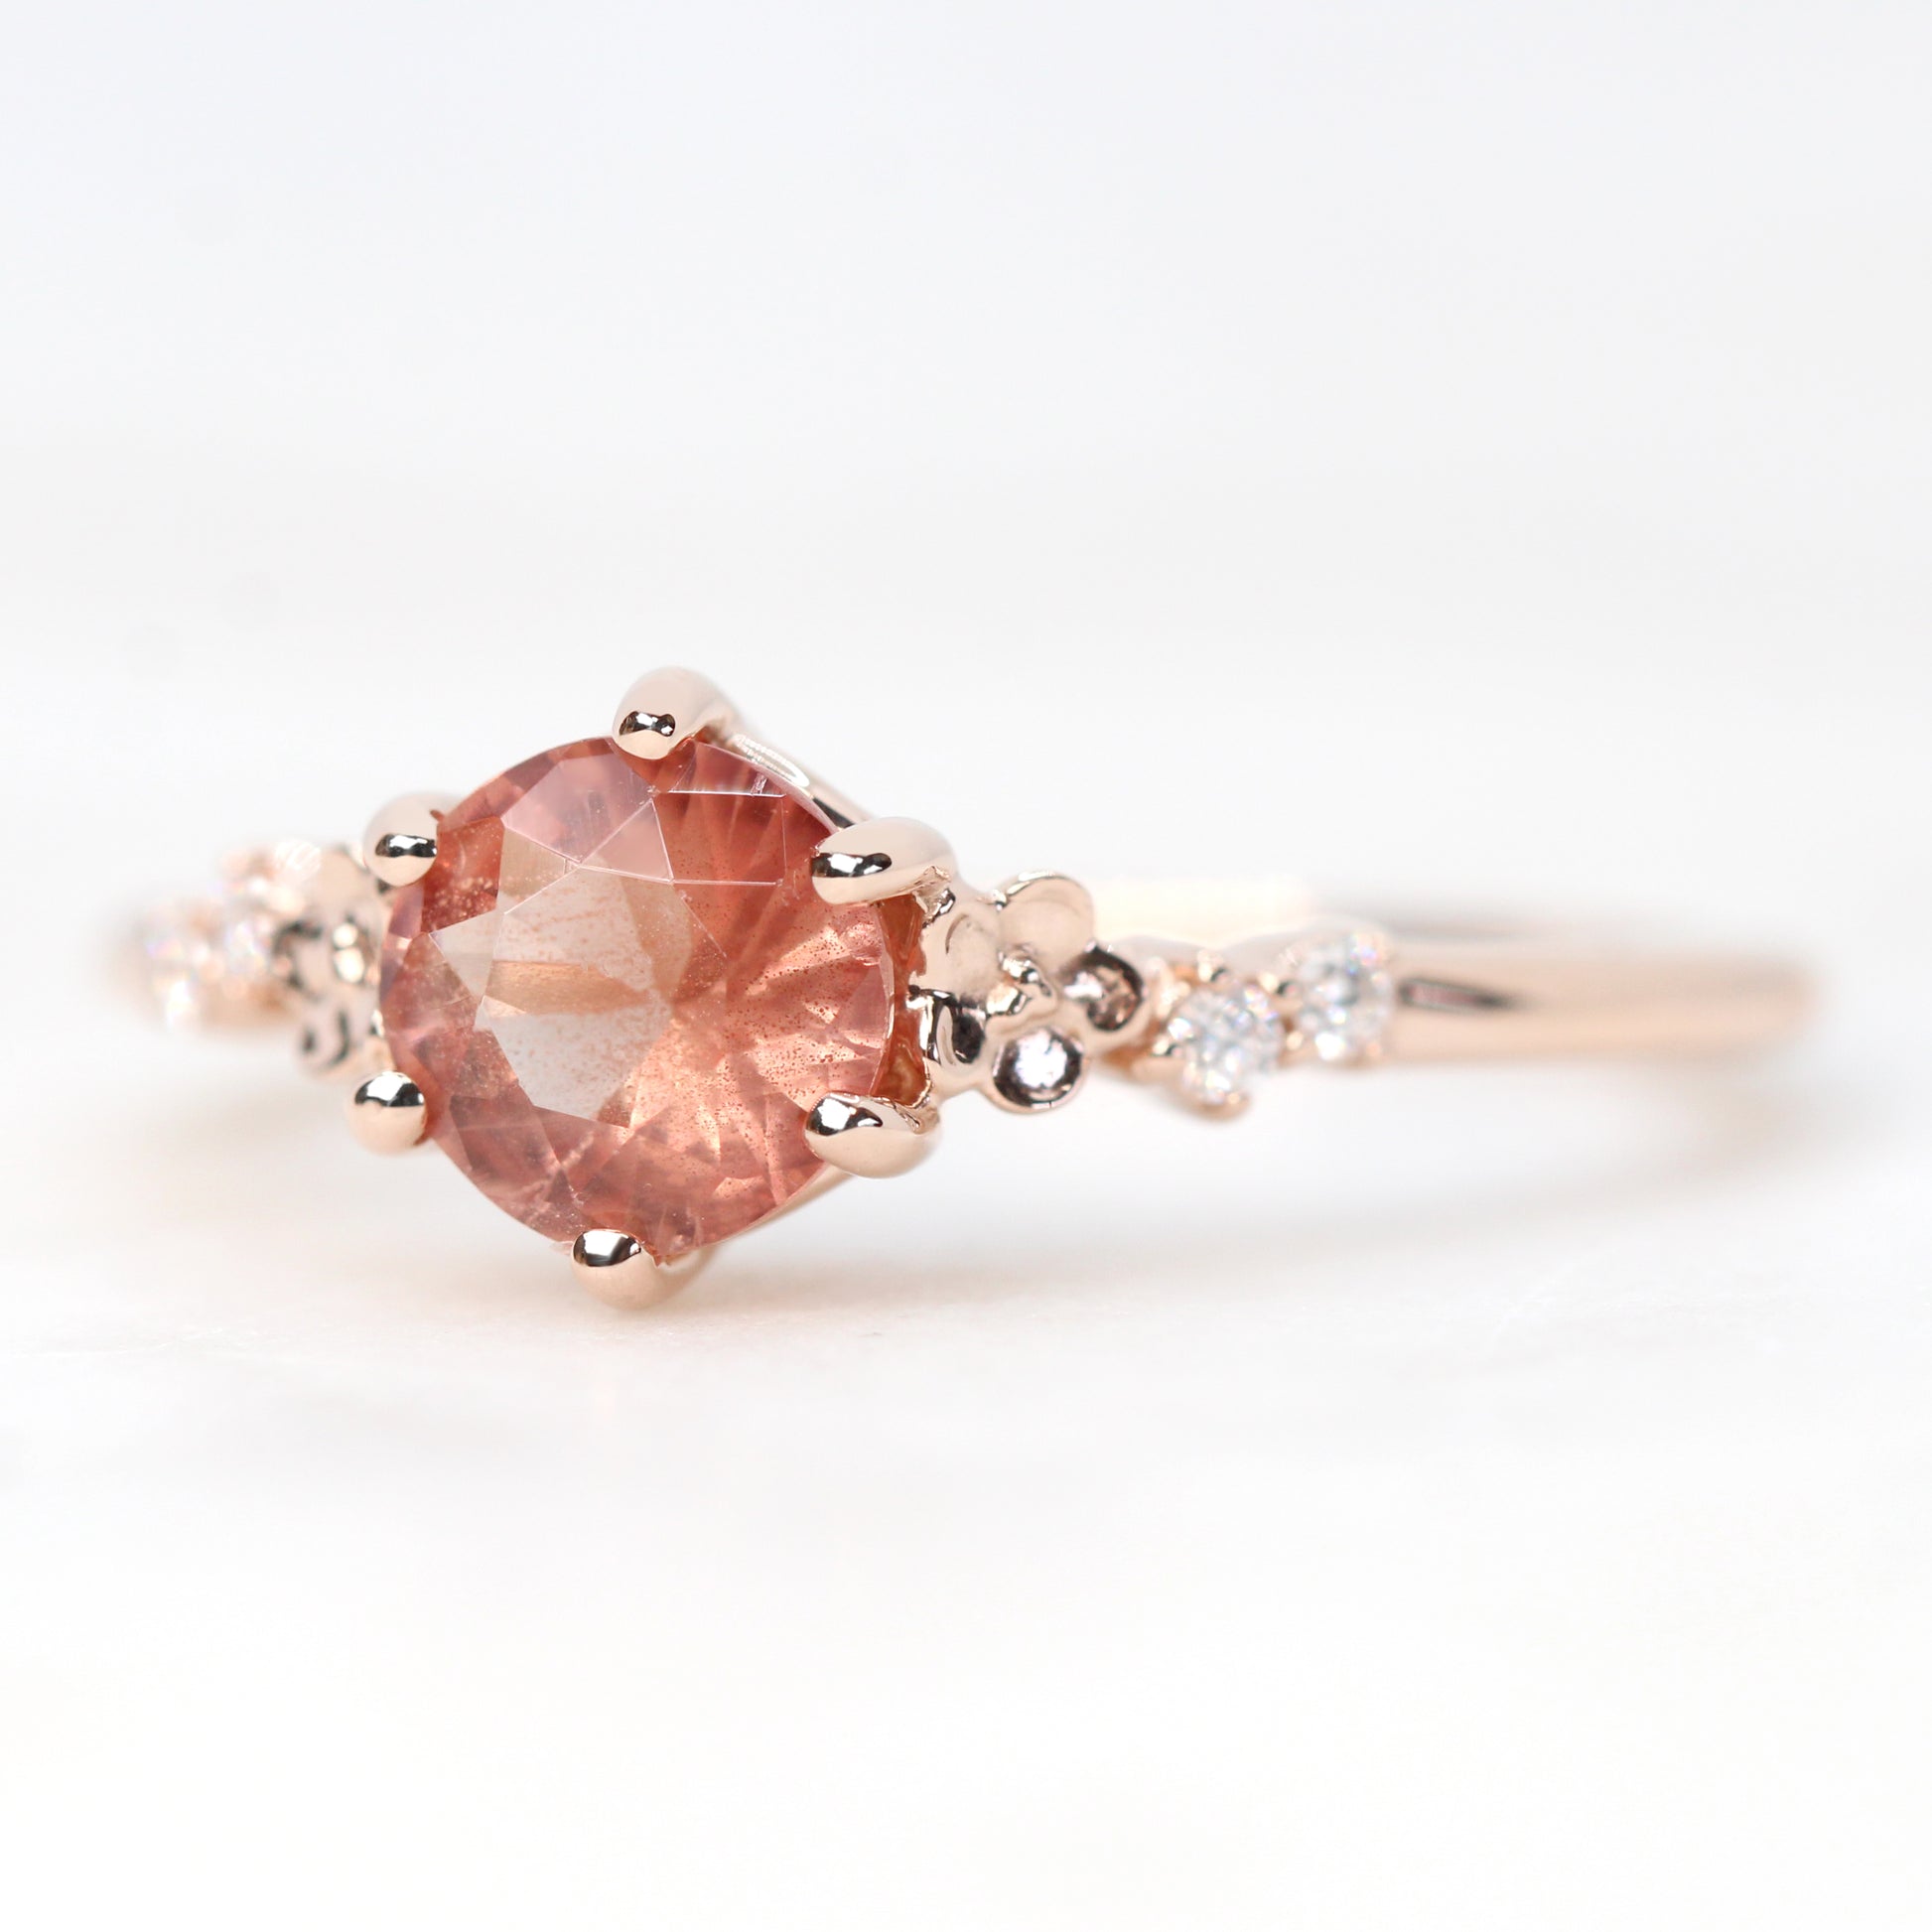 Meadow Ring with a 0.70 Carat Round Sunstone and White Accent Diamonds in 14k Rose Gold - Ready to Size and Ship - Midwinter Co. Alternative Bridal Rings and Modern Fine Jewelry